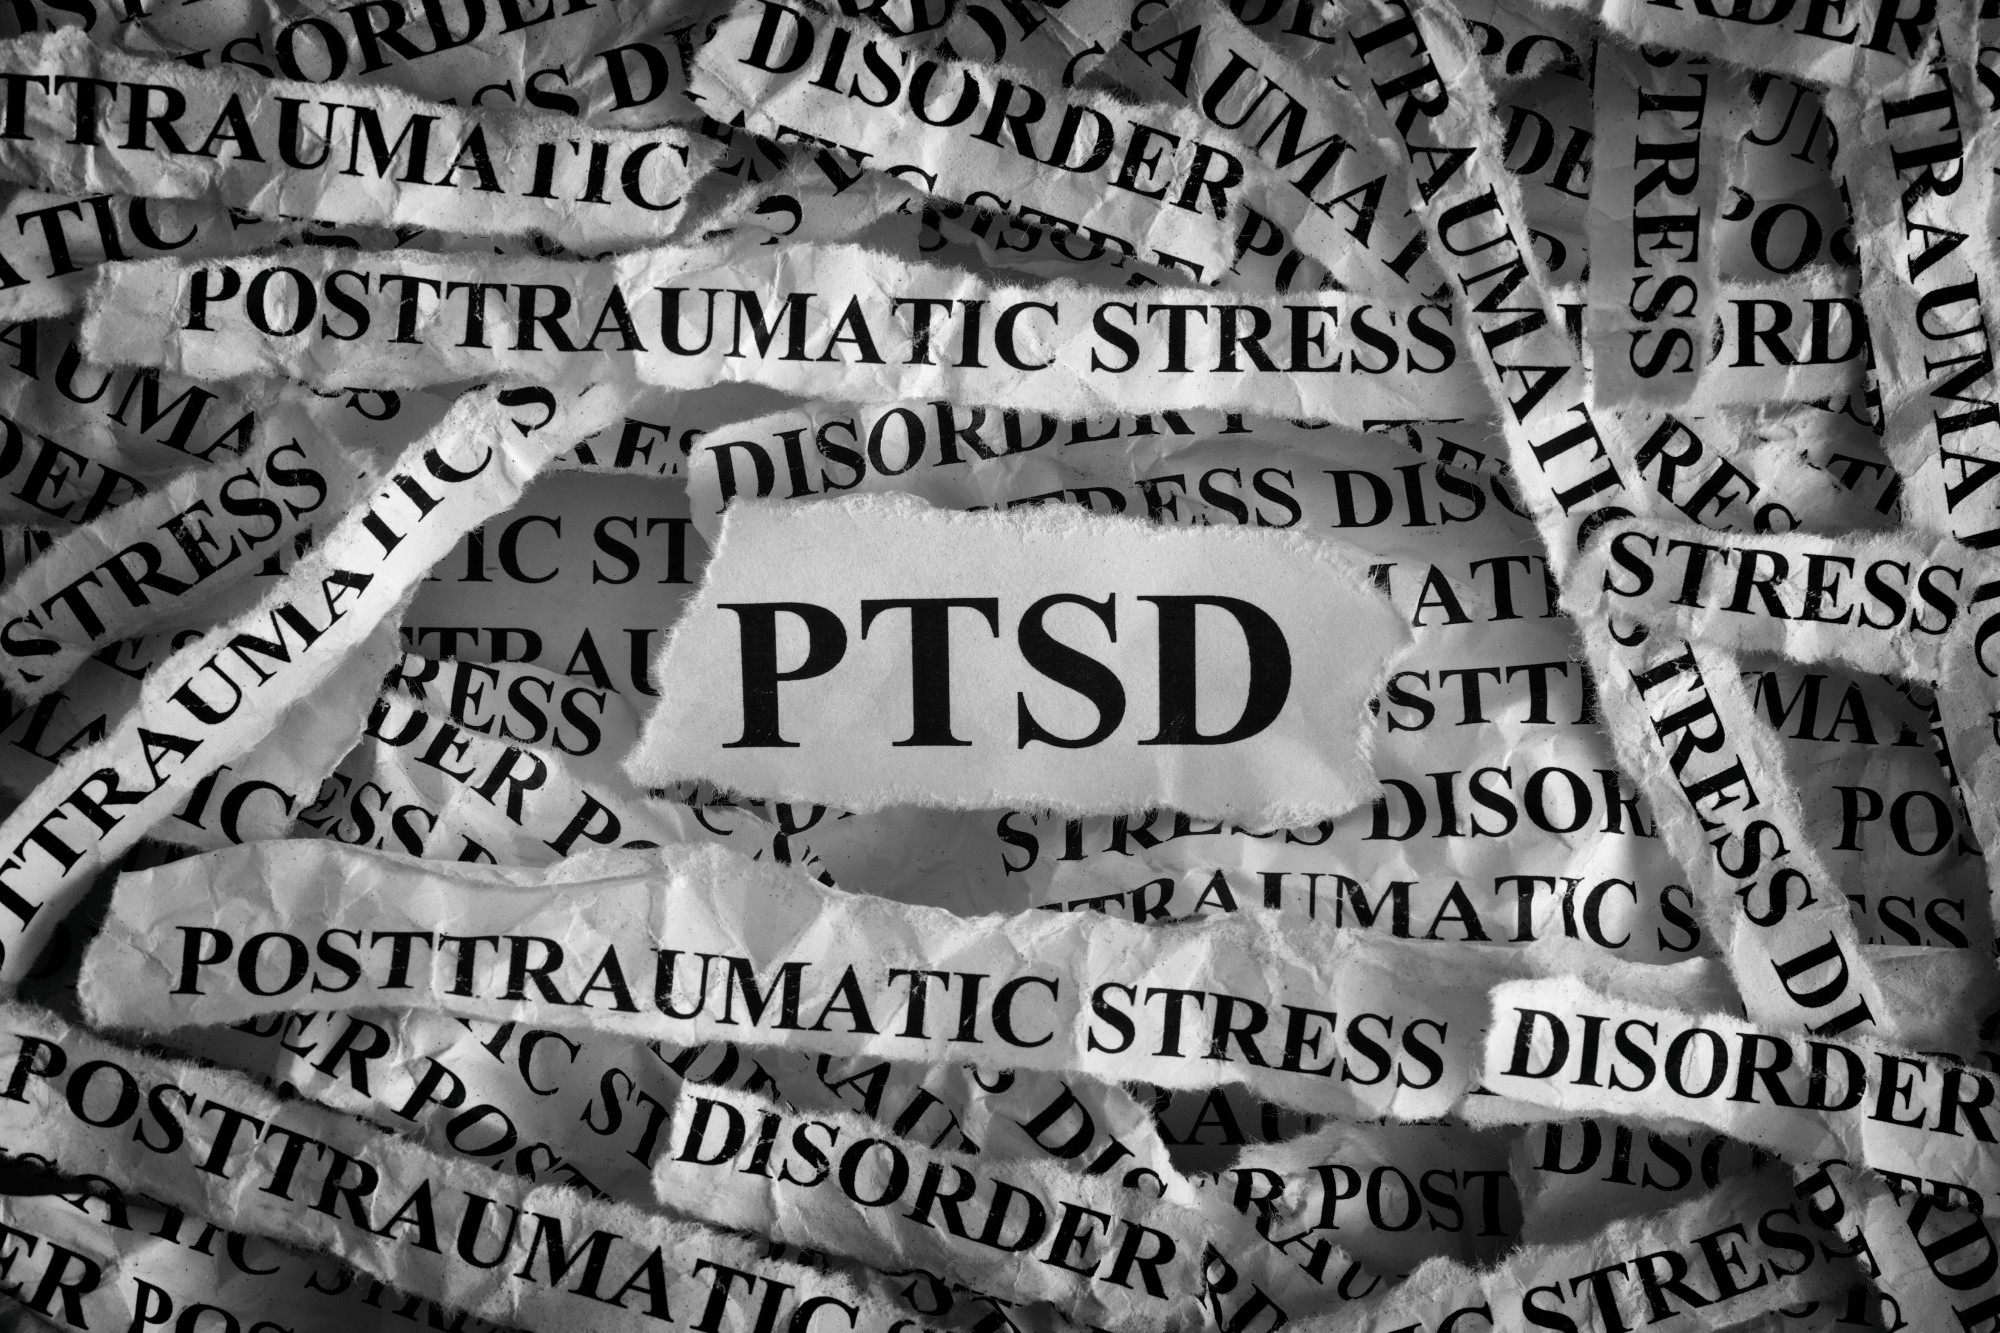 PTSD and related text